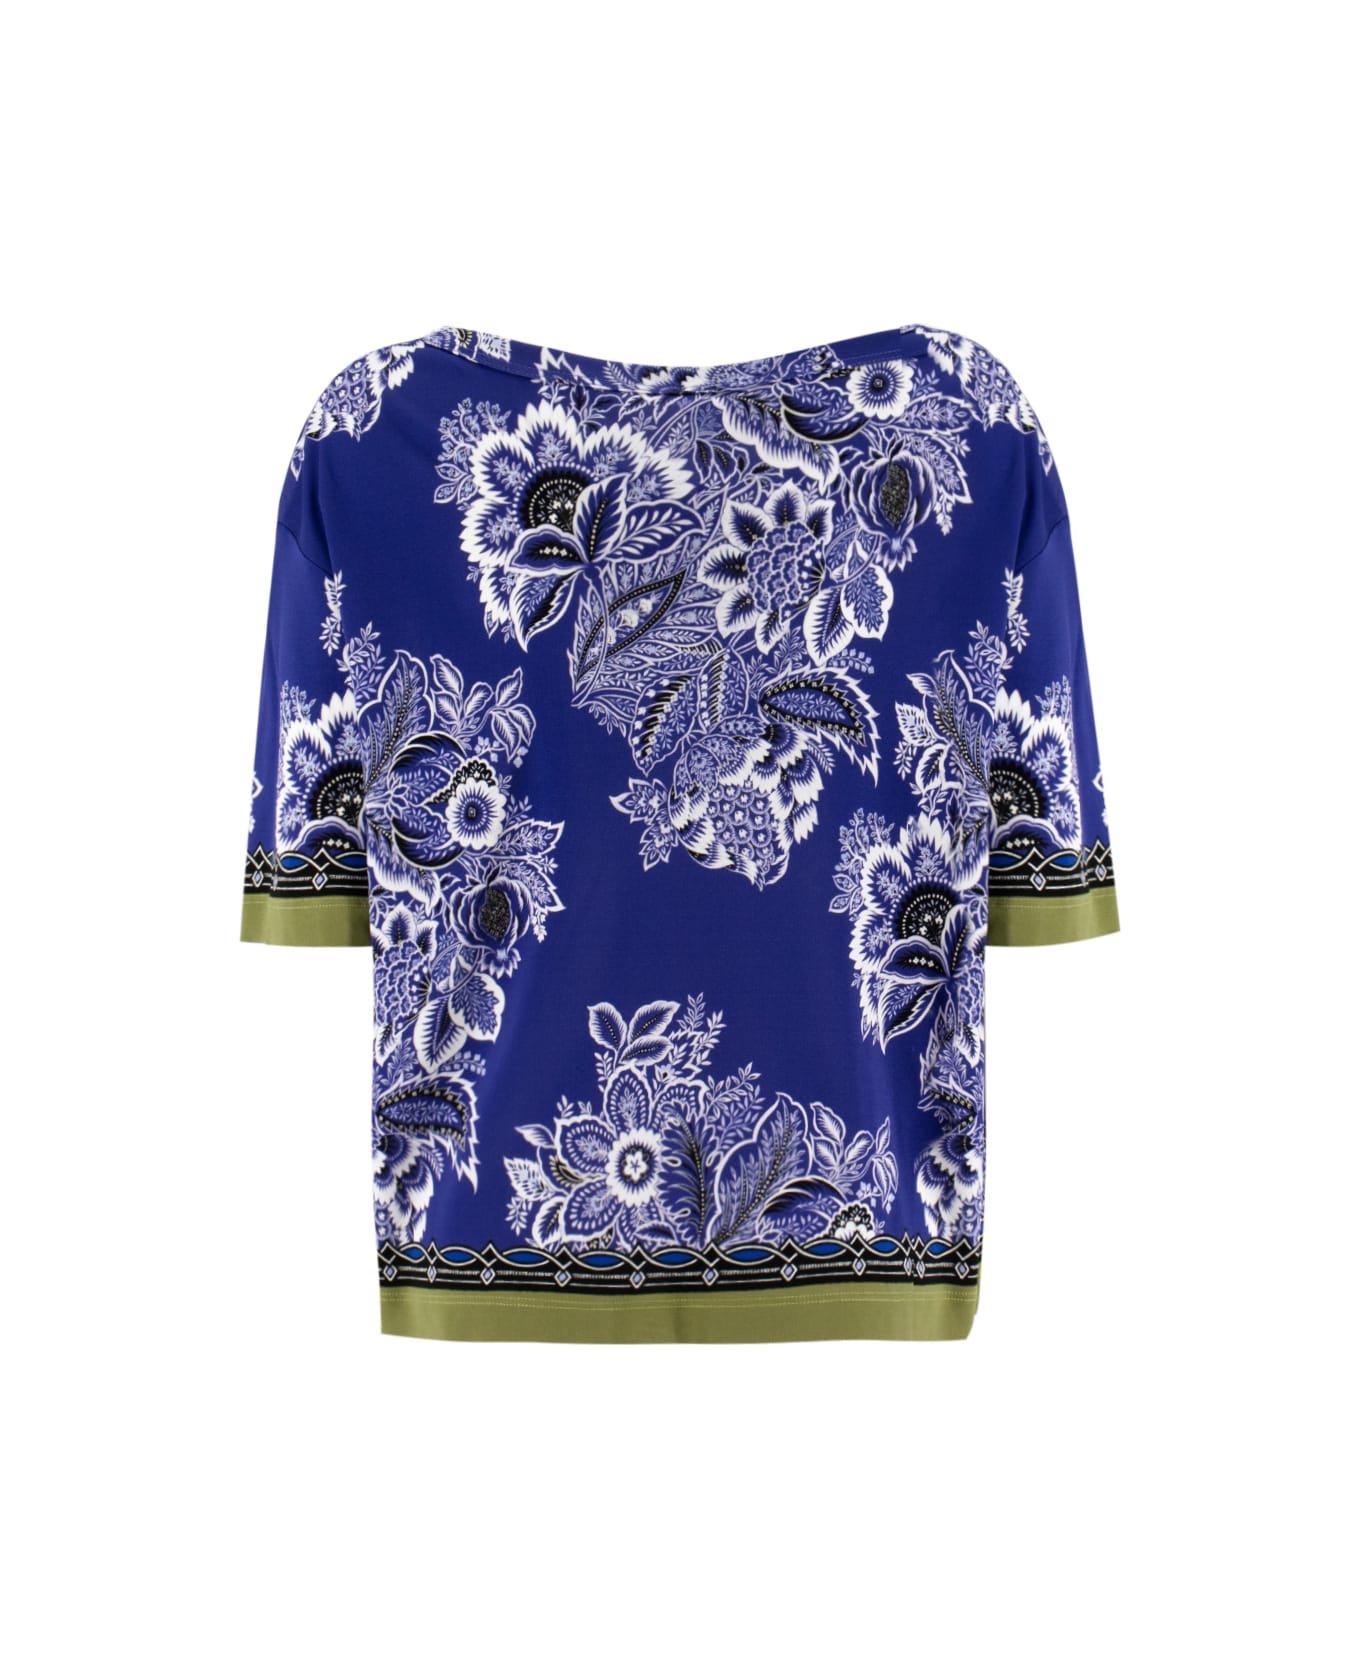 Etro Floral T-shirt - PRINT ON BLUE BASE Tシャツ